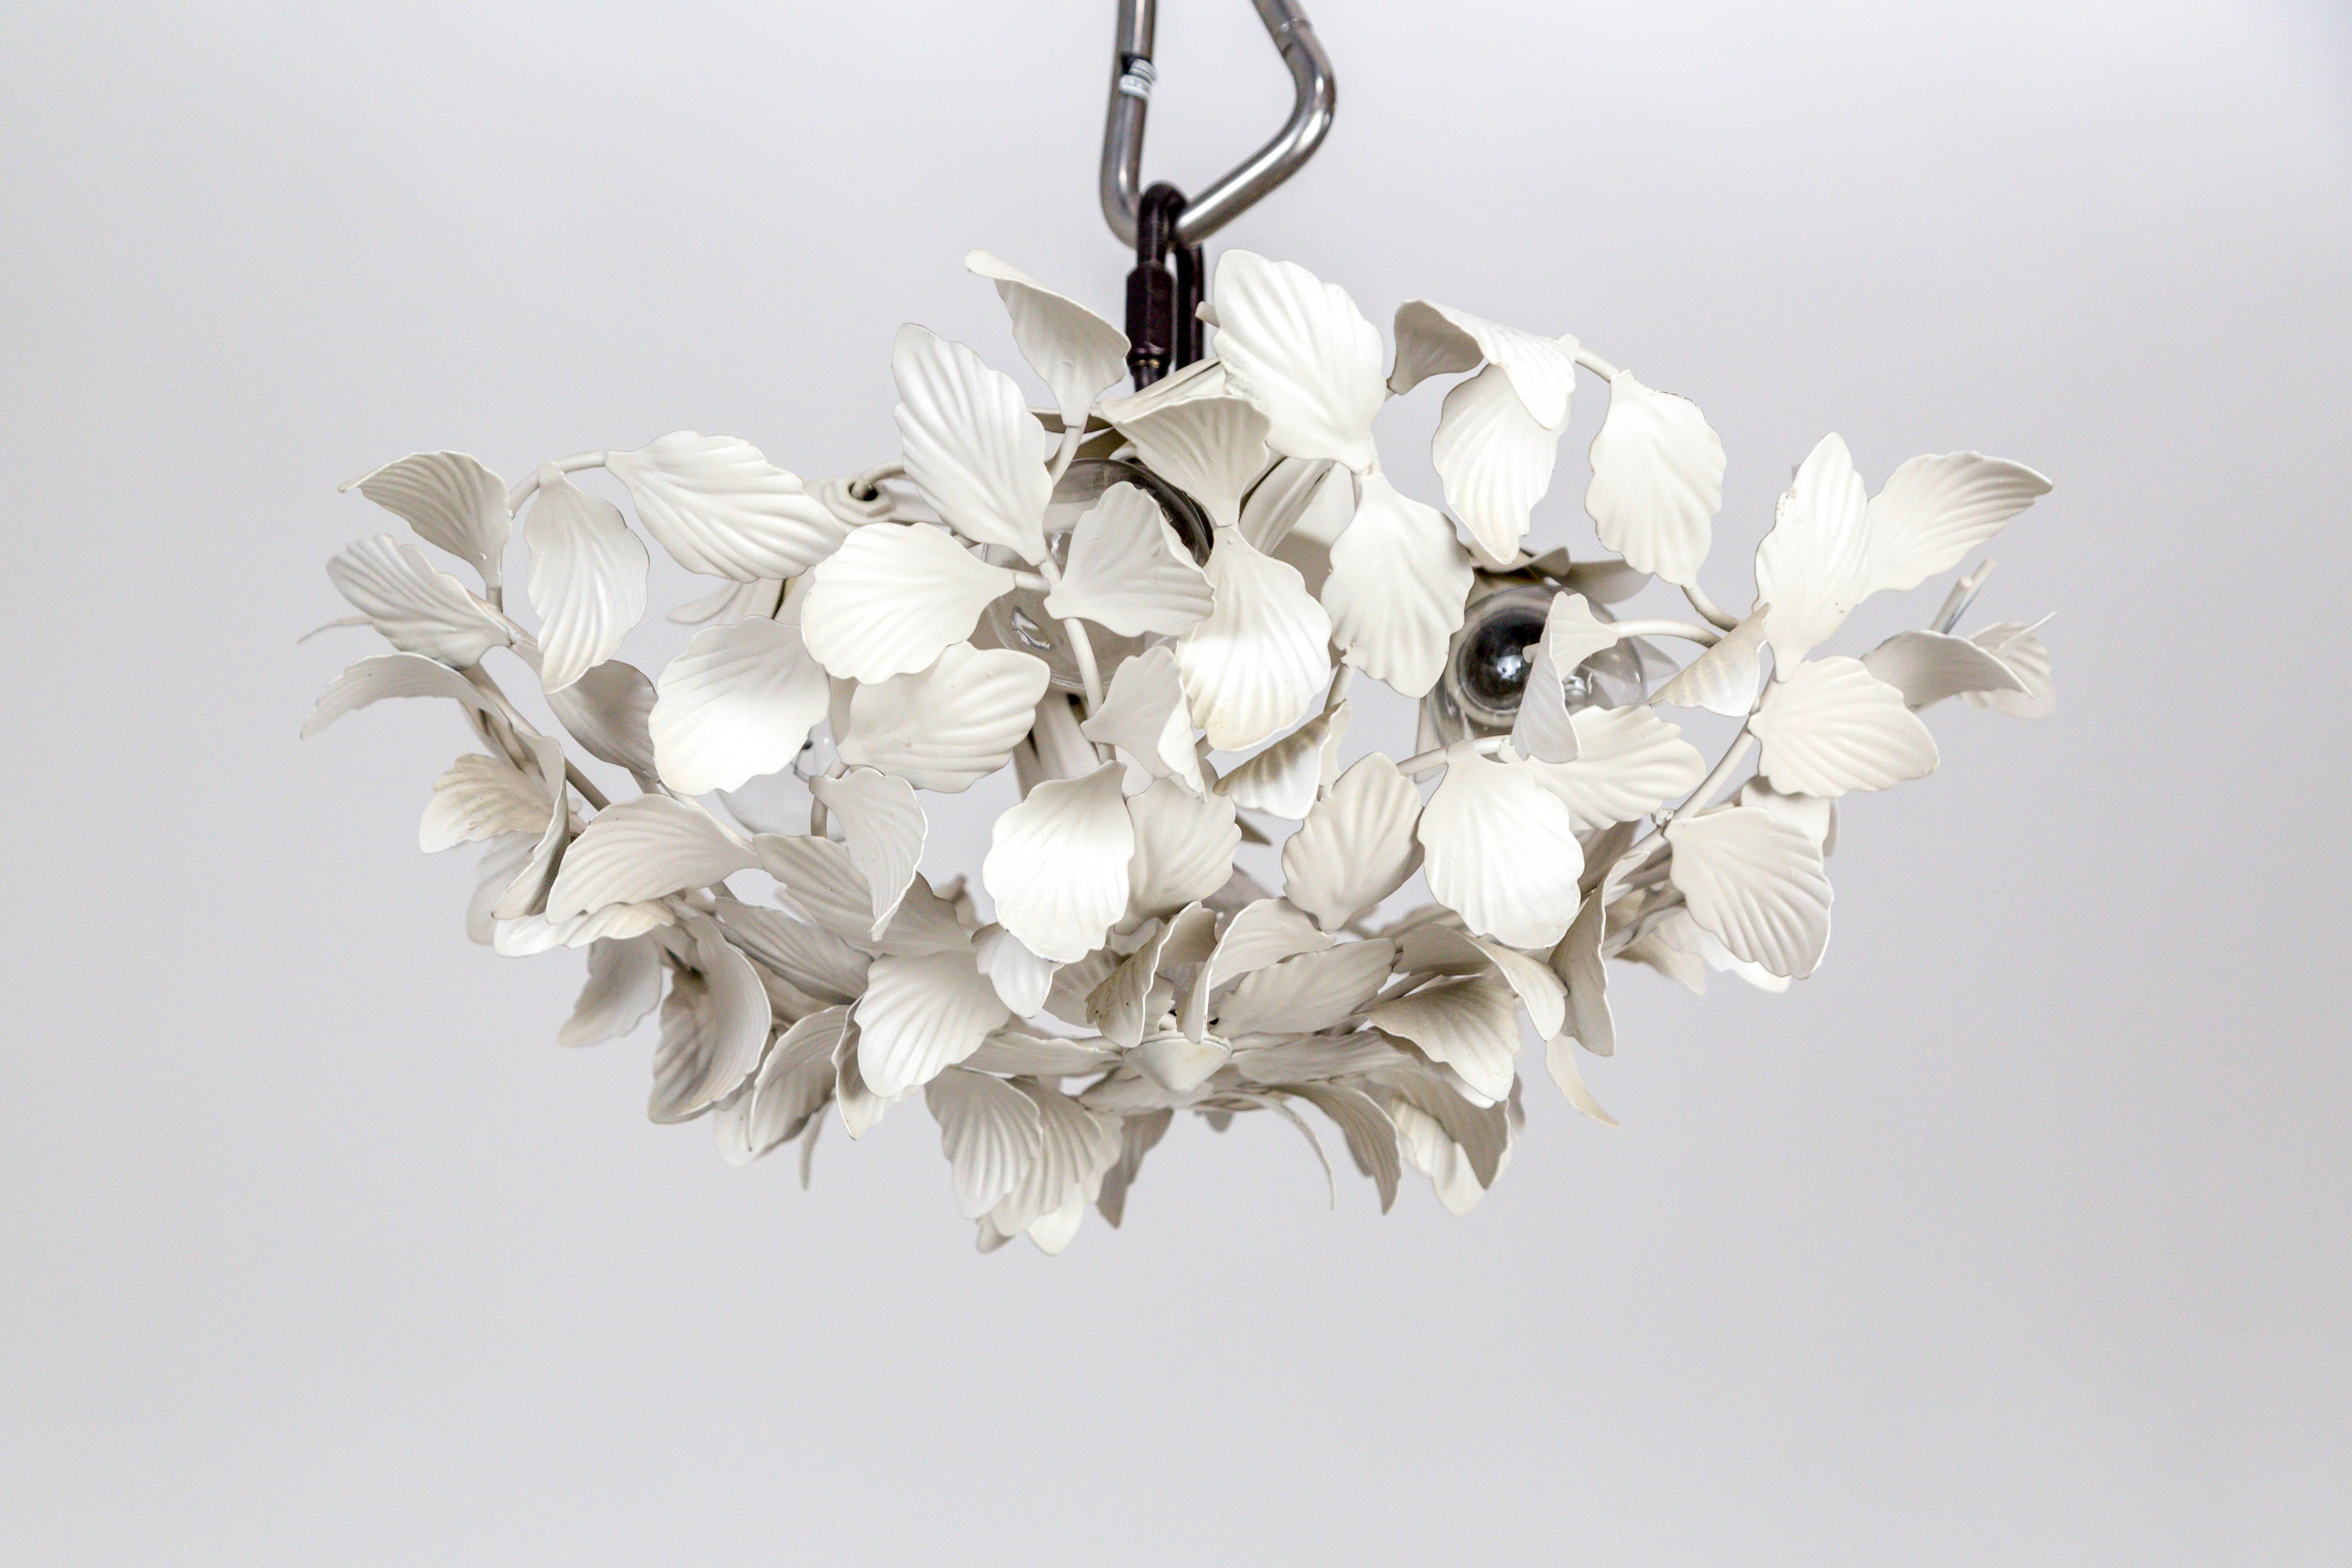 We have 2 vintage, white, painted metal pendant lights in a leaf cluster design. They work beautifully on the ceiling or wall-mounted. The four, medium base sockets are held in decorative, tole leaf socket covers, mounted to the canopy. A short stem